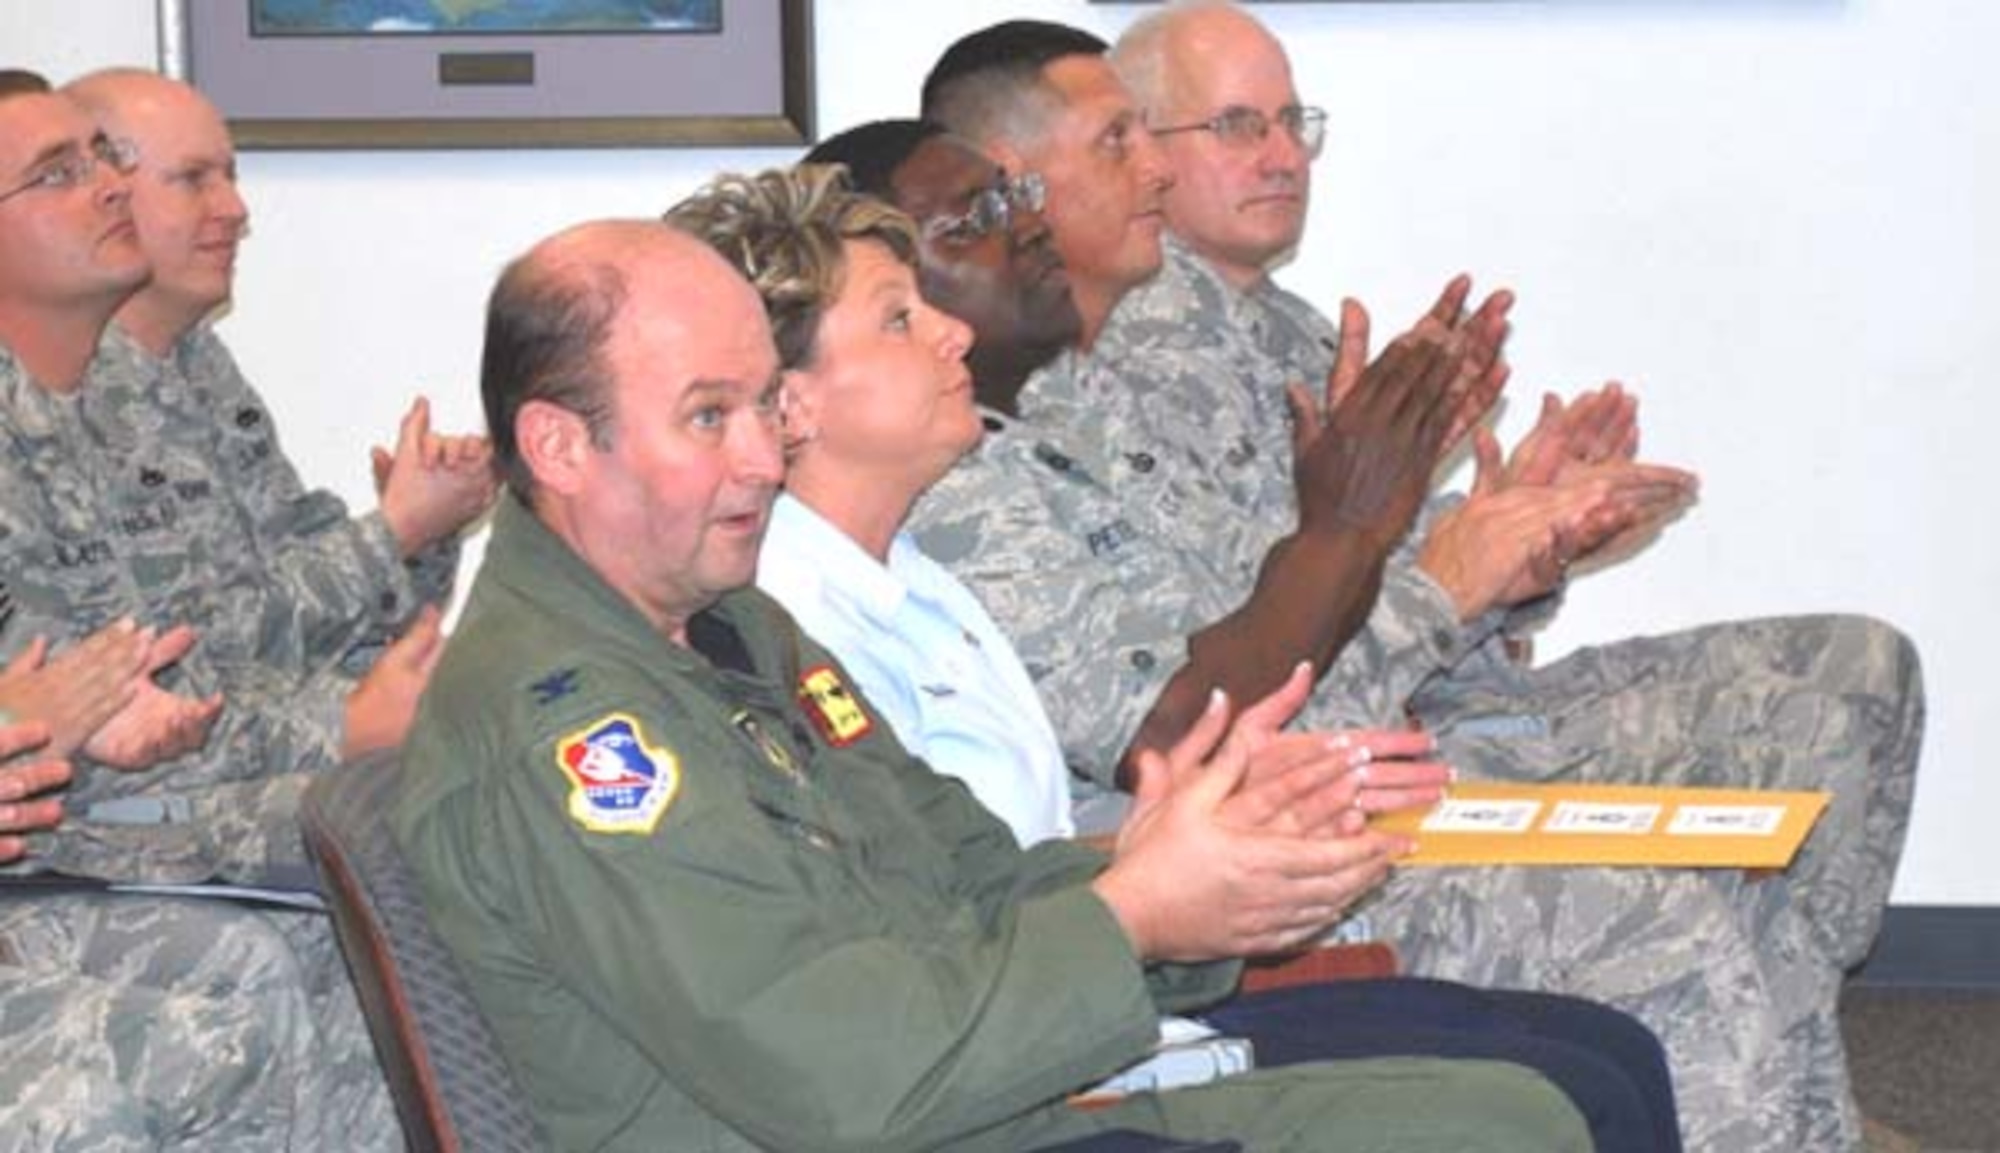 507th Air Refueling Wing and 35th Combat Communications Squadron members respond with applause as they hear the outbrief good news.